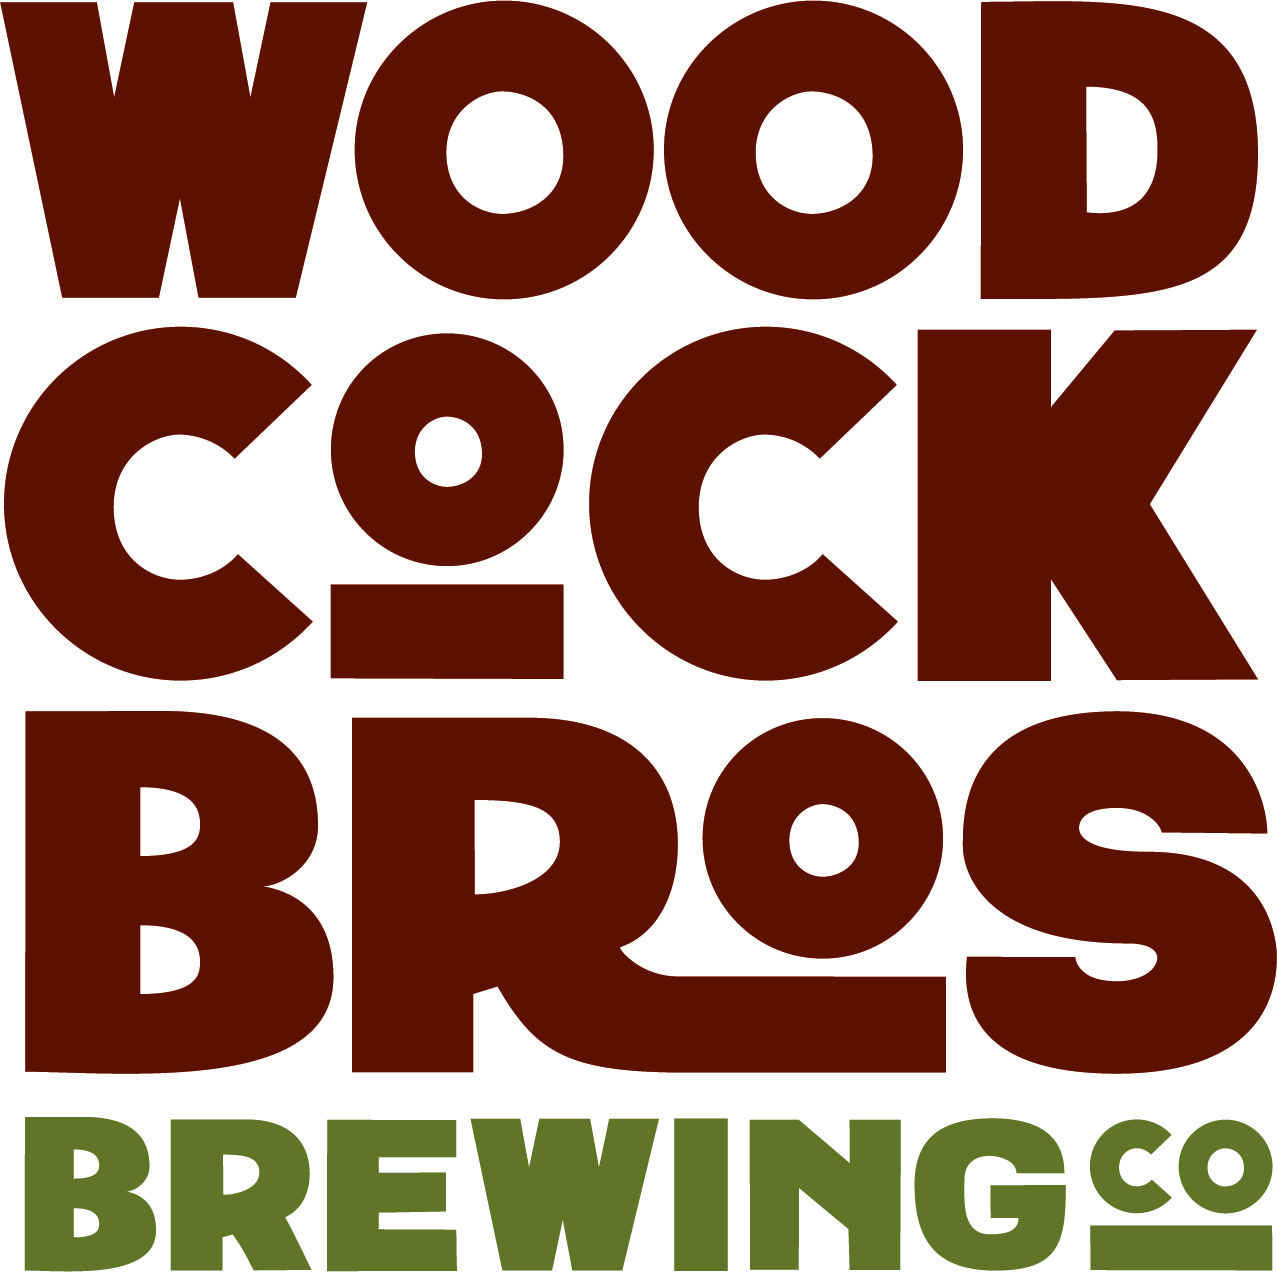 Anniversary Celebration at Woodcock Brothers Brewery